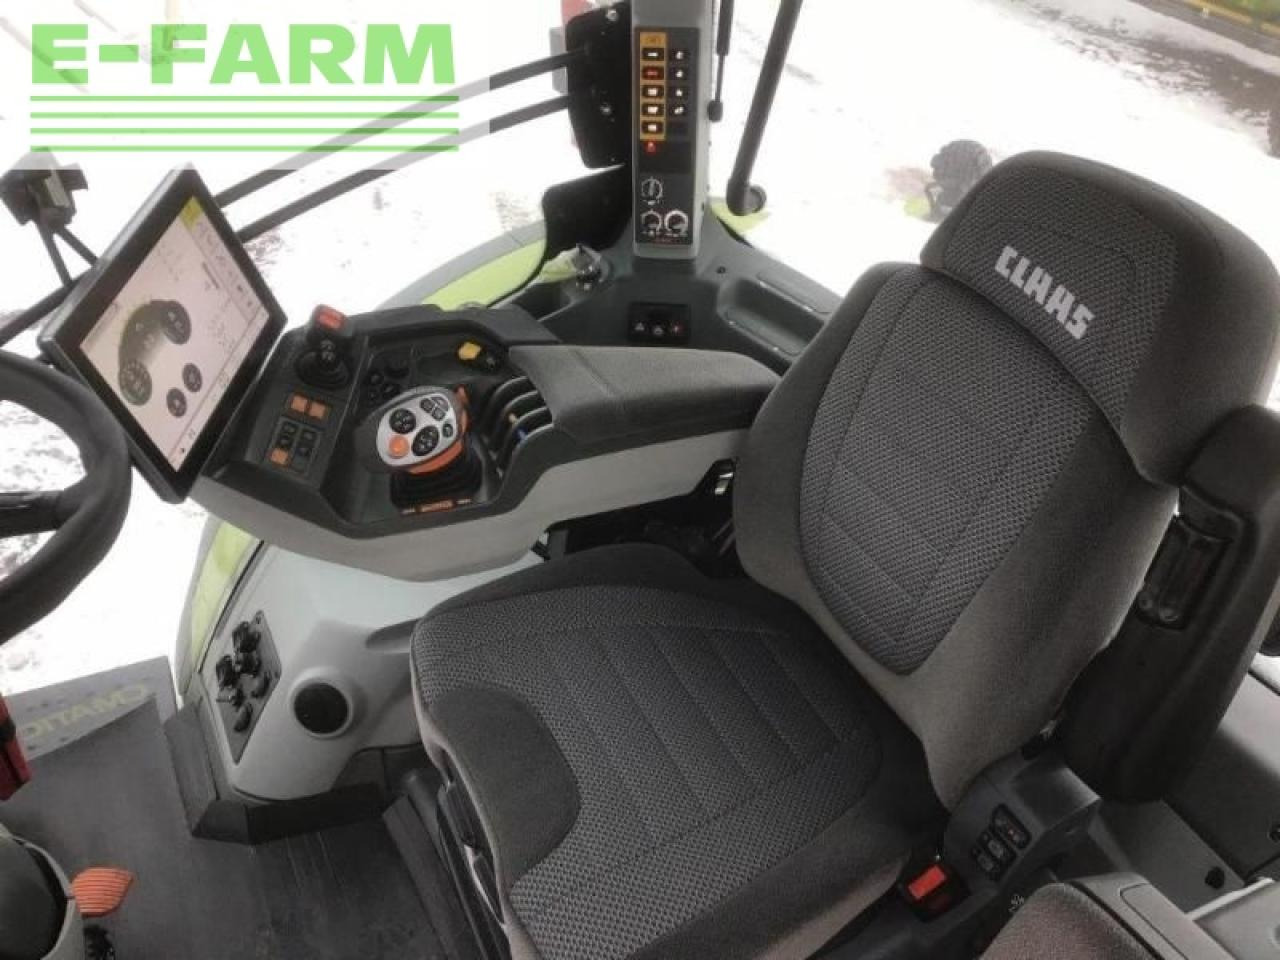 Farm tractor CLAAS arion 630 cmatic stage v